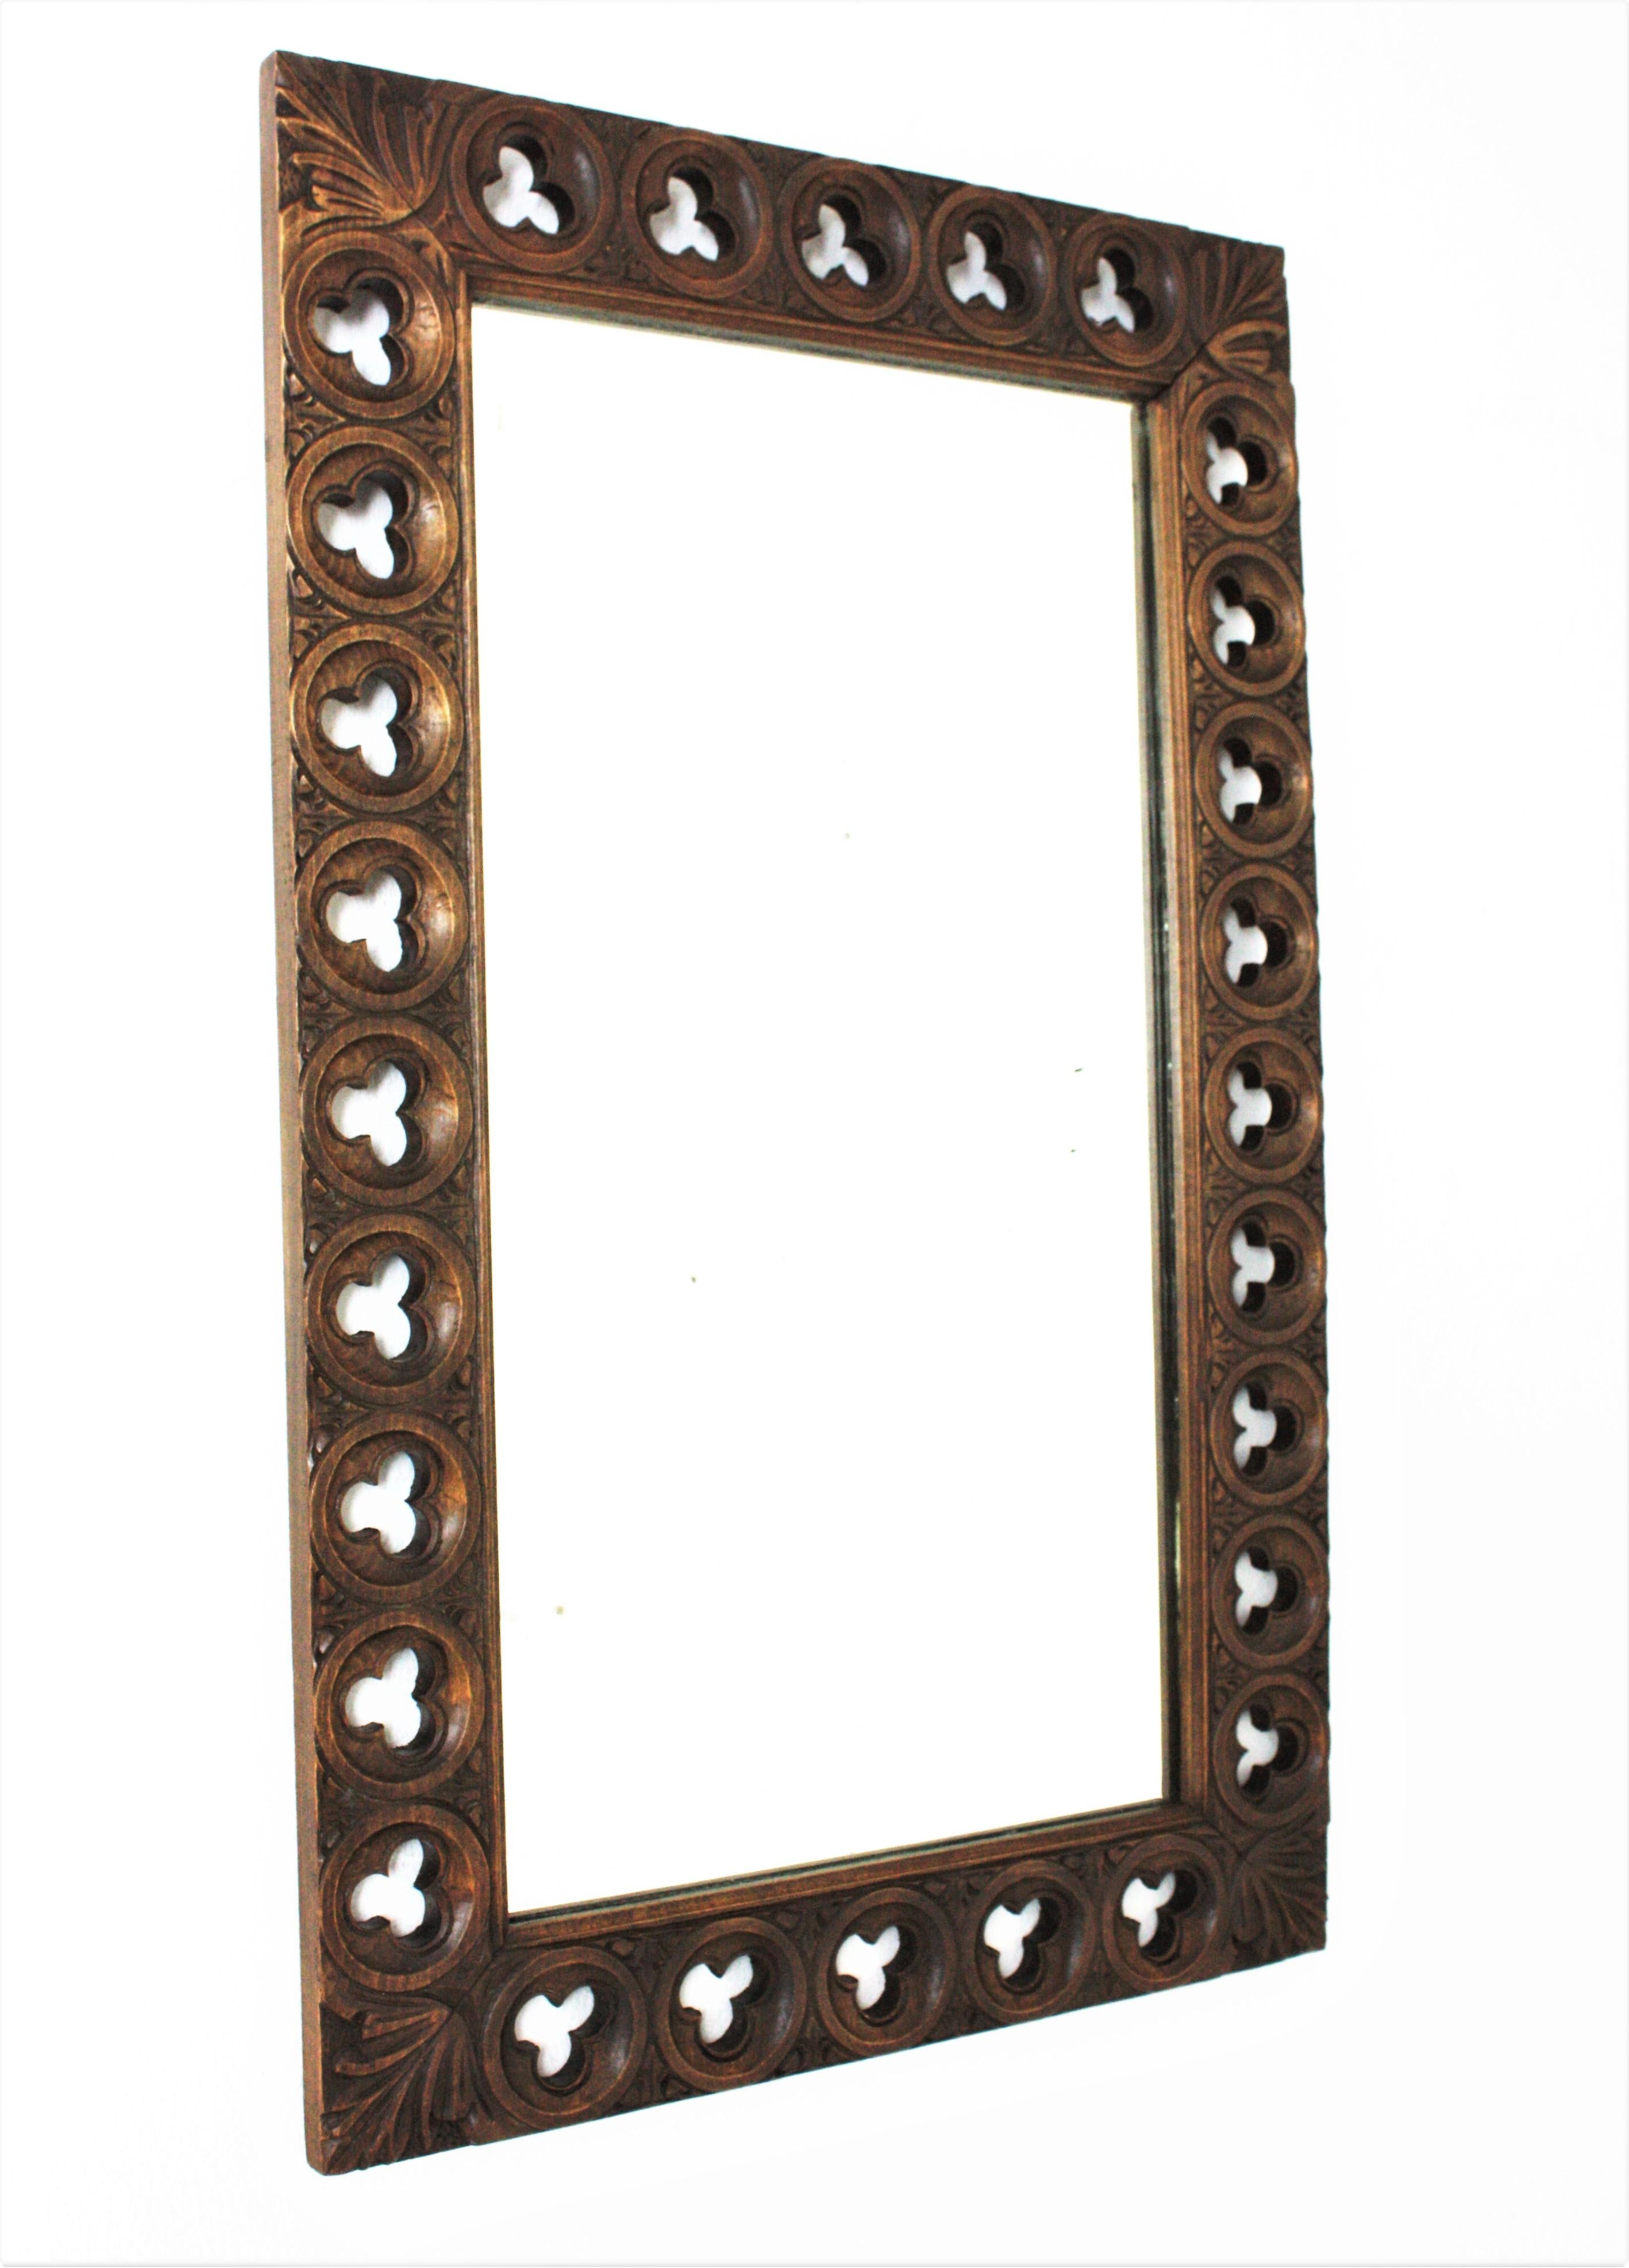 Hand-Crafted Spanish Colonial Rectangular Wall Mirror in Carved Wood